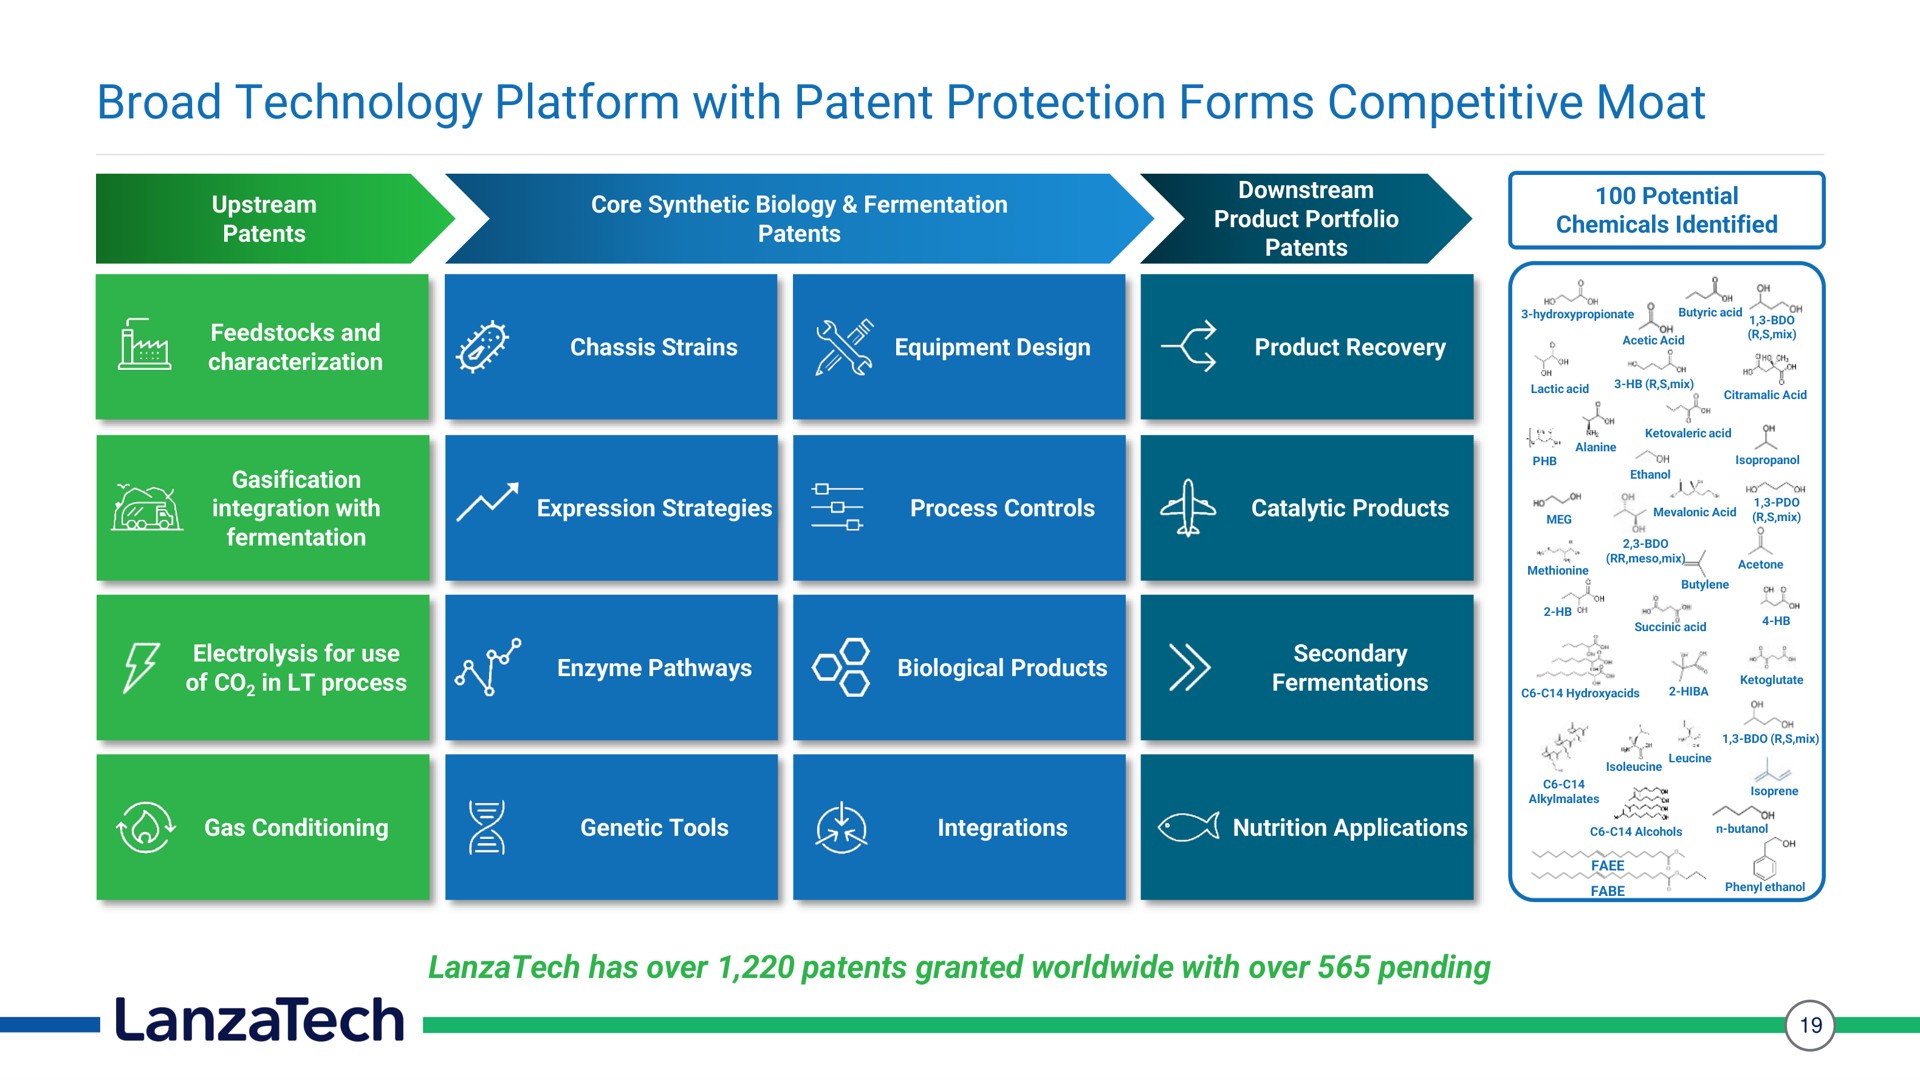 broad technology platform with patent protection forms competitive moat | LanzaTech